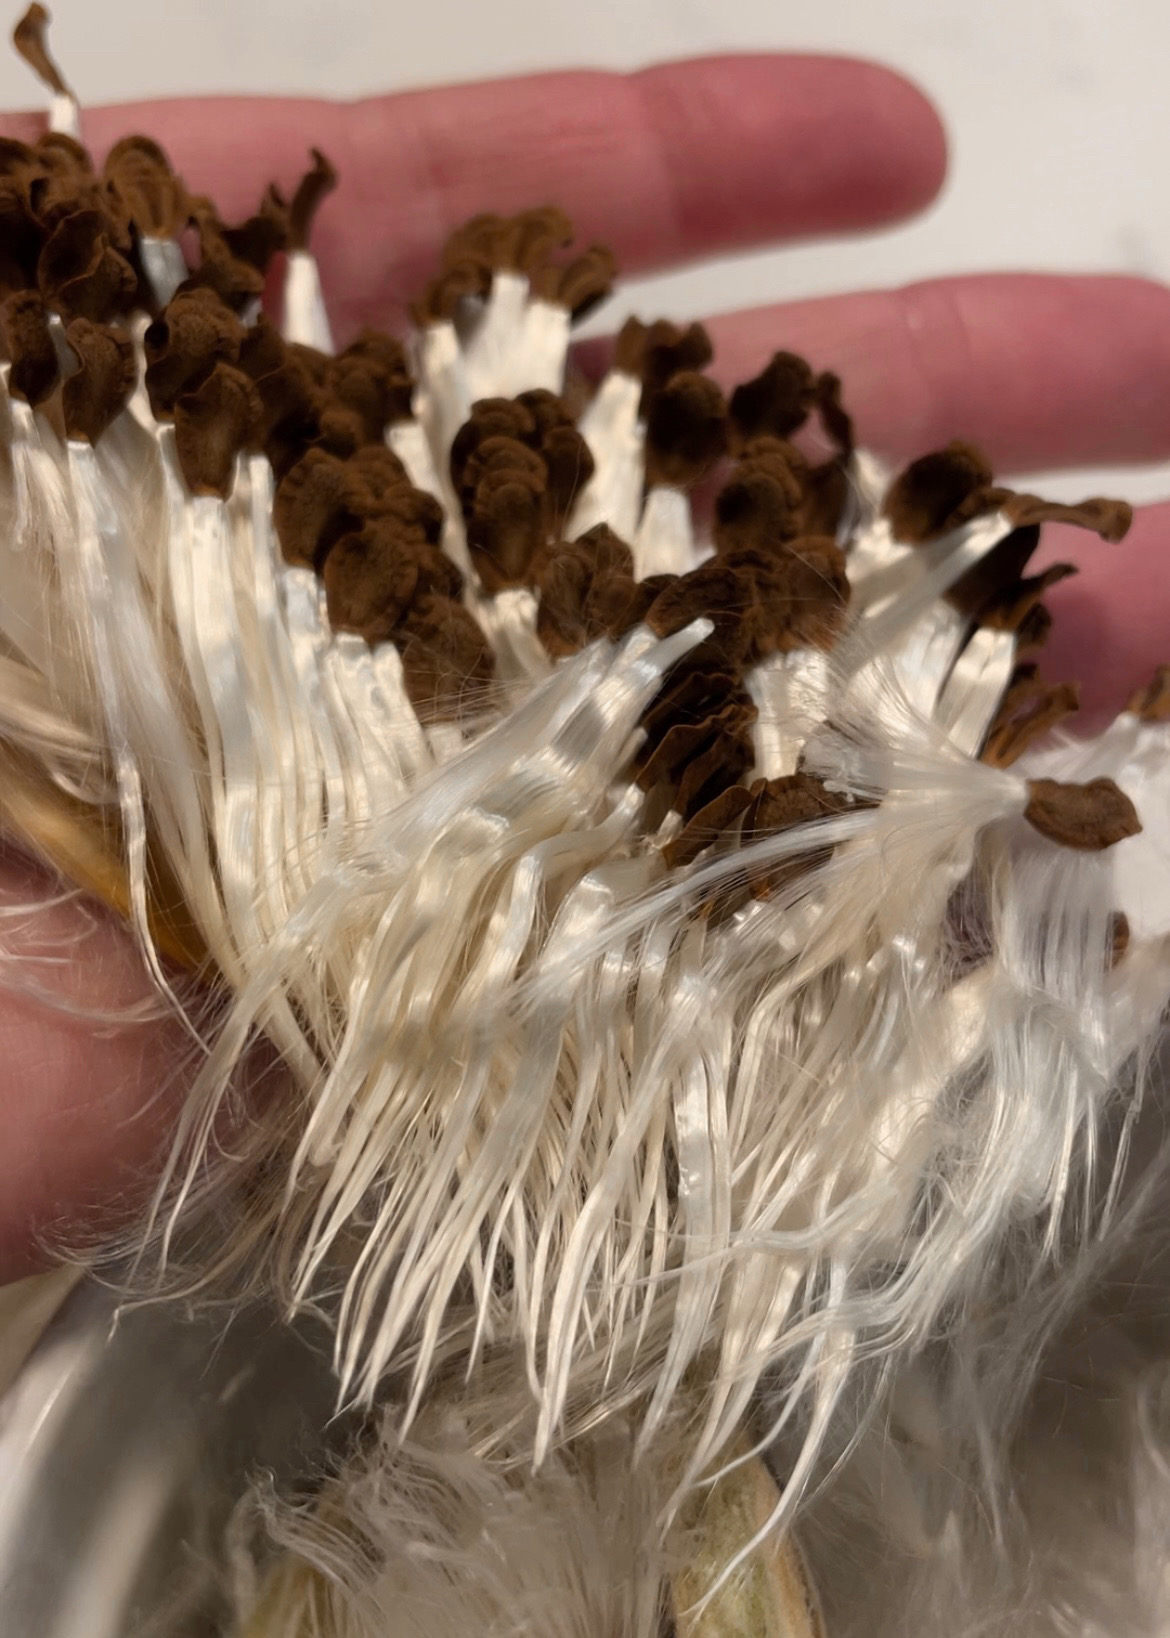 Each milkweed pod contains 50-100 seeds.